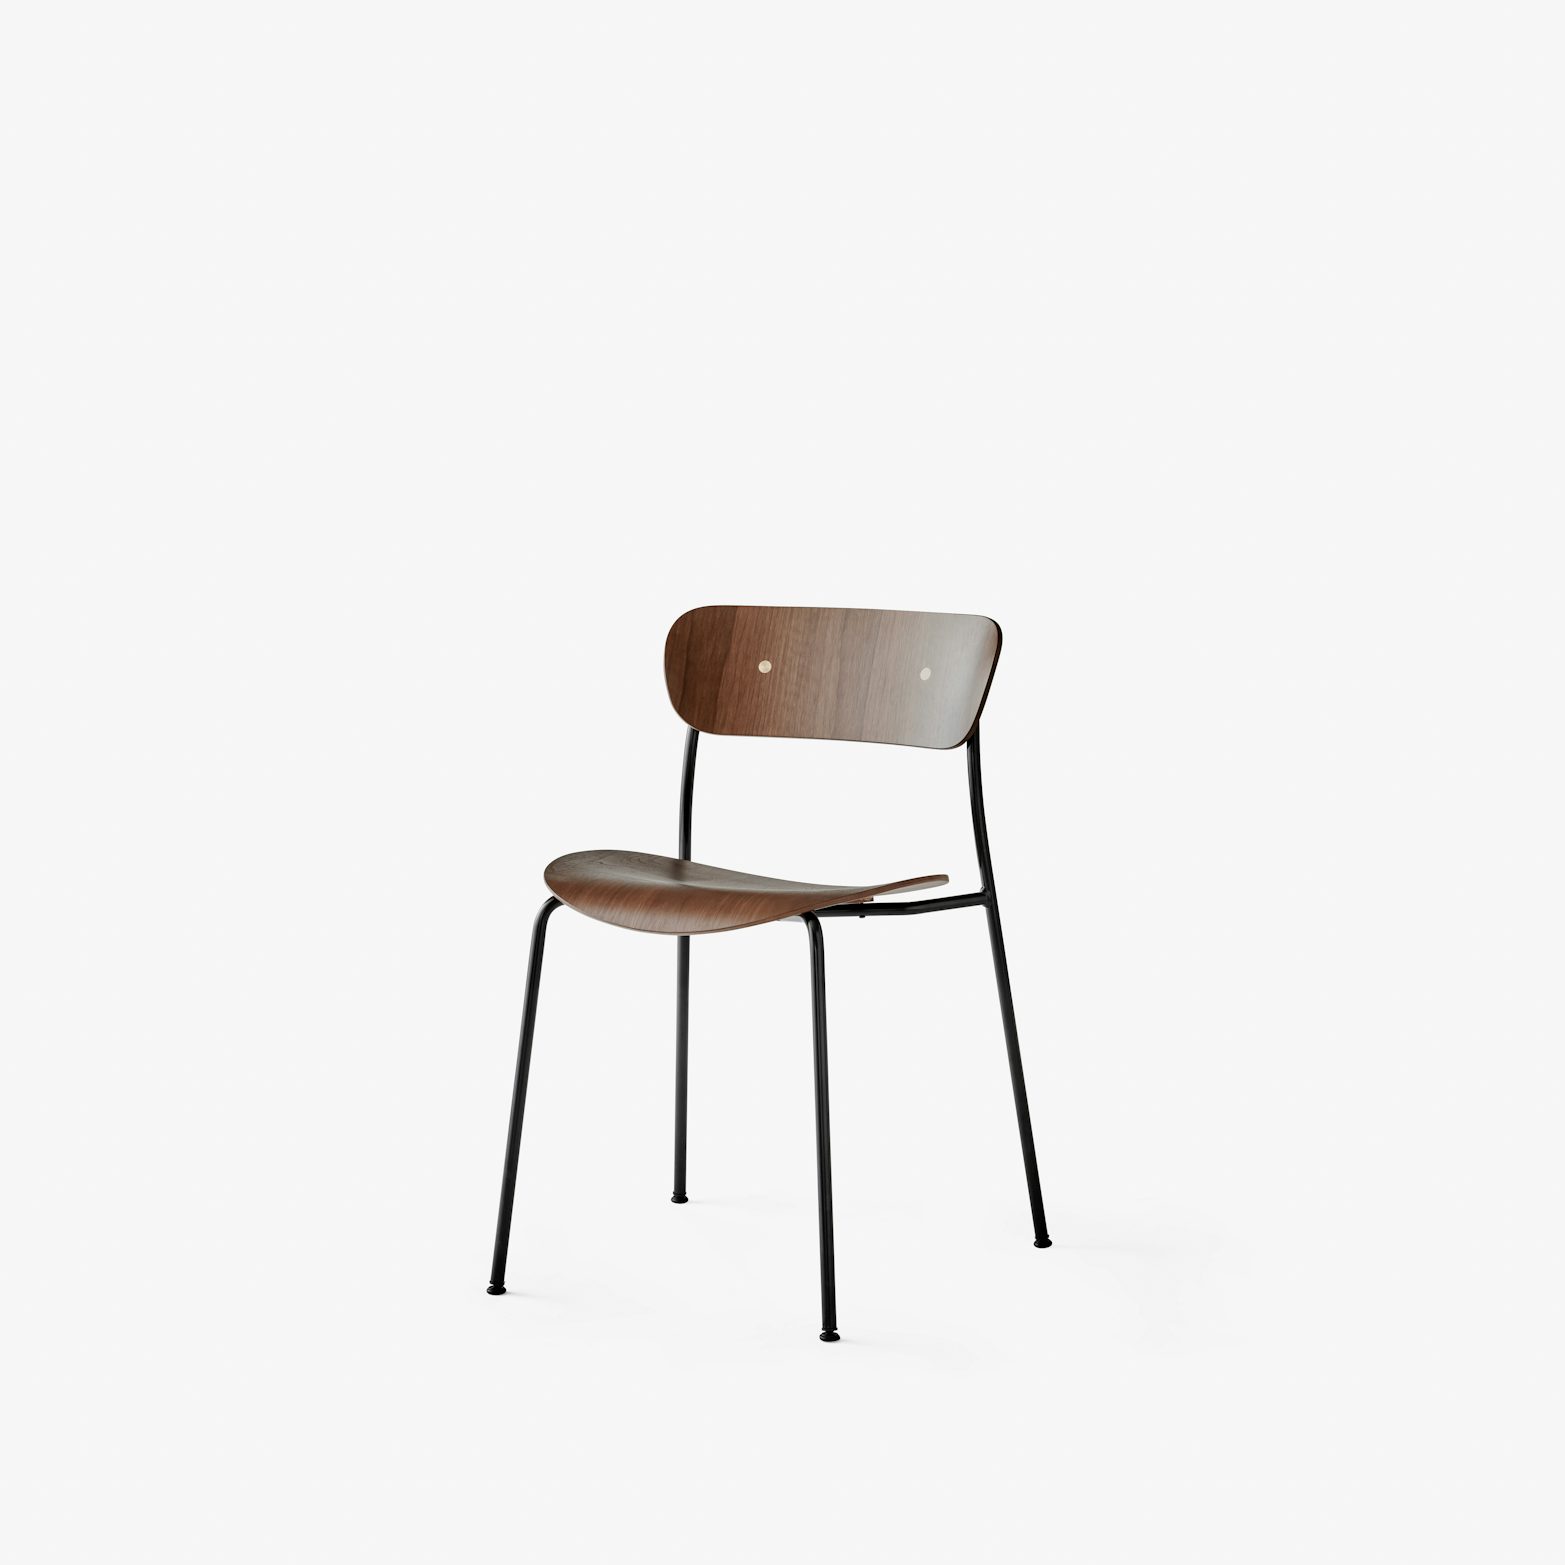 Pavilion chair av1 anderssen and voll andtradition 14 copy 2